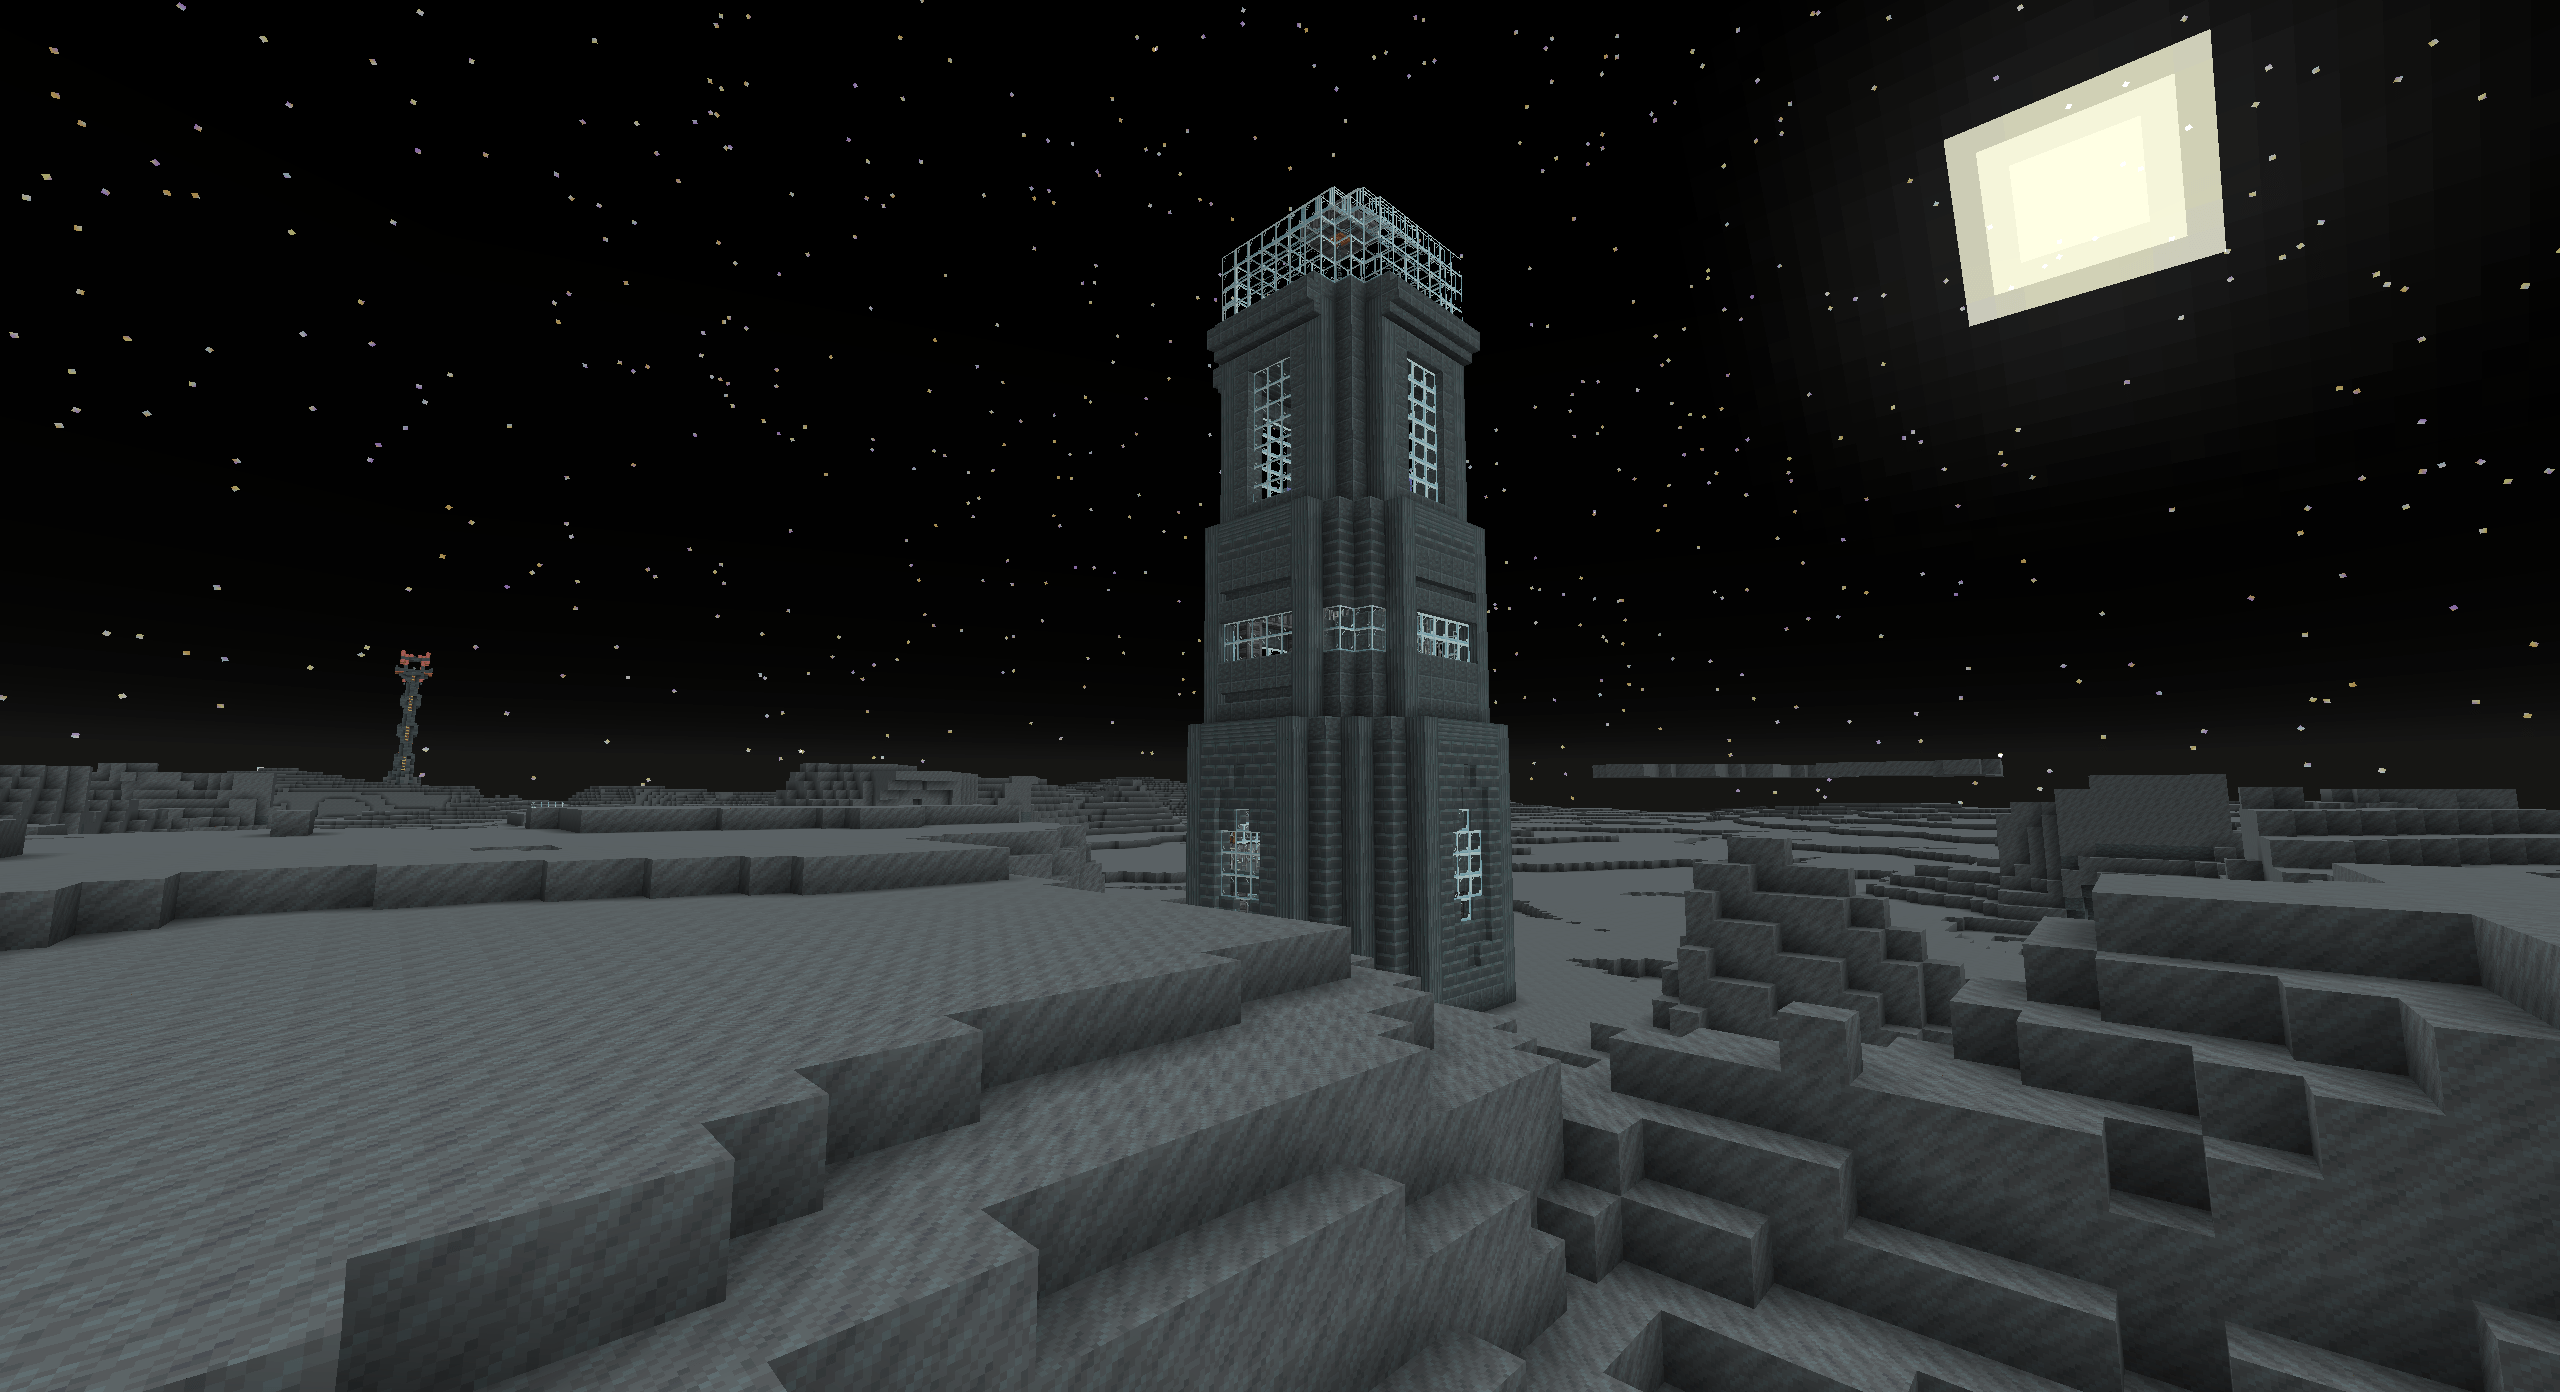 The Lunar Tower